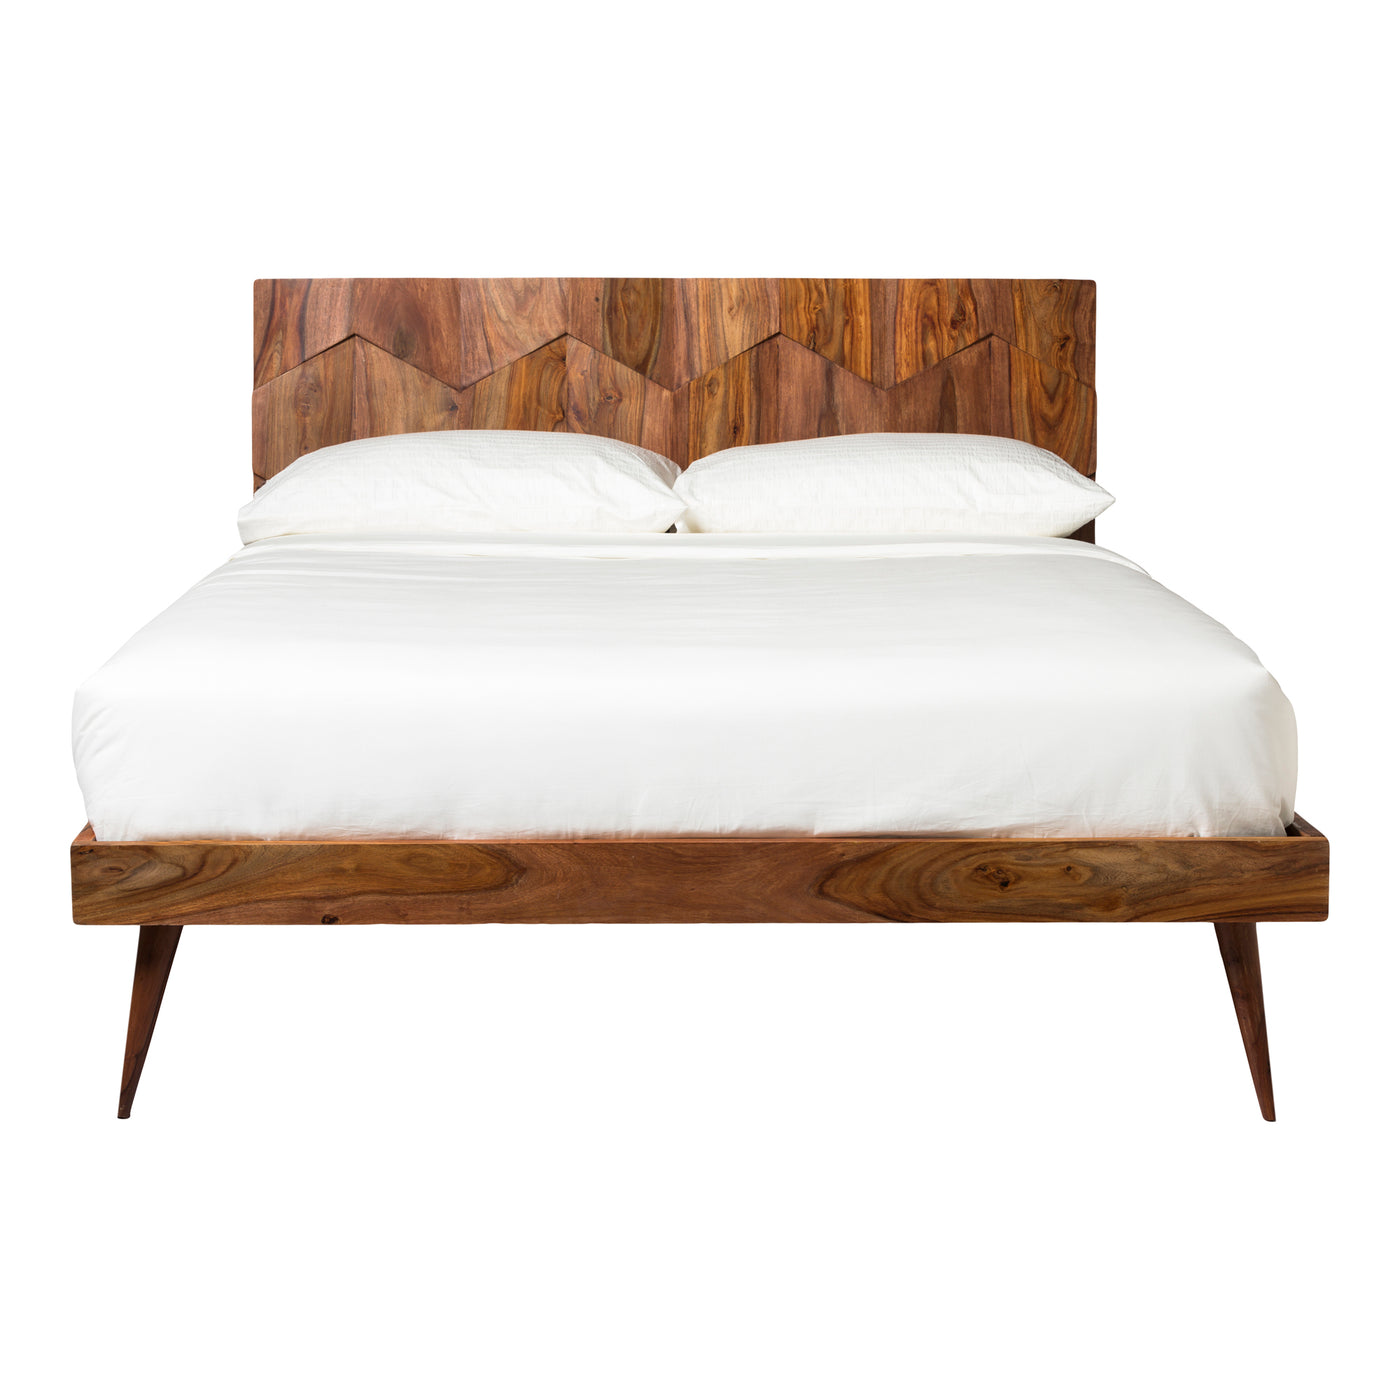 The O2 bed is retro-inspired with a modern twist. Constructed with solid sheesham wood, this piece makes it resistant to m...